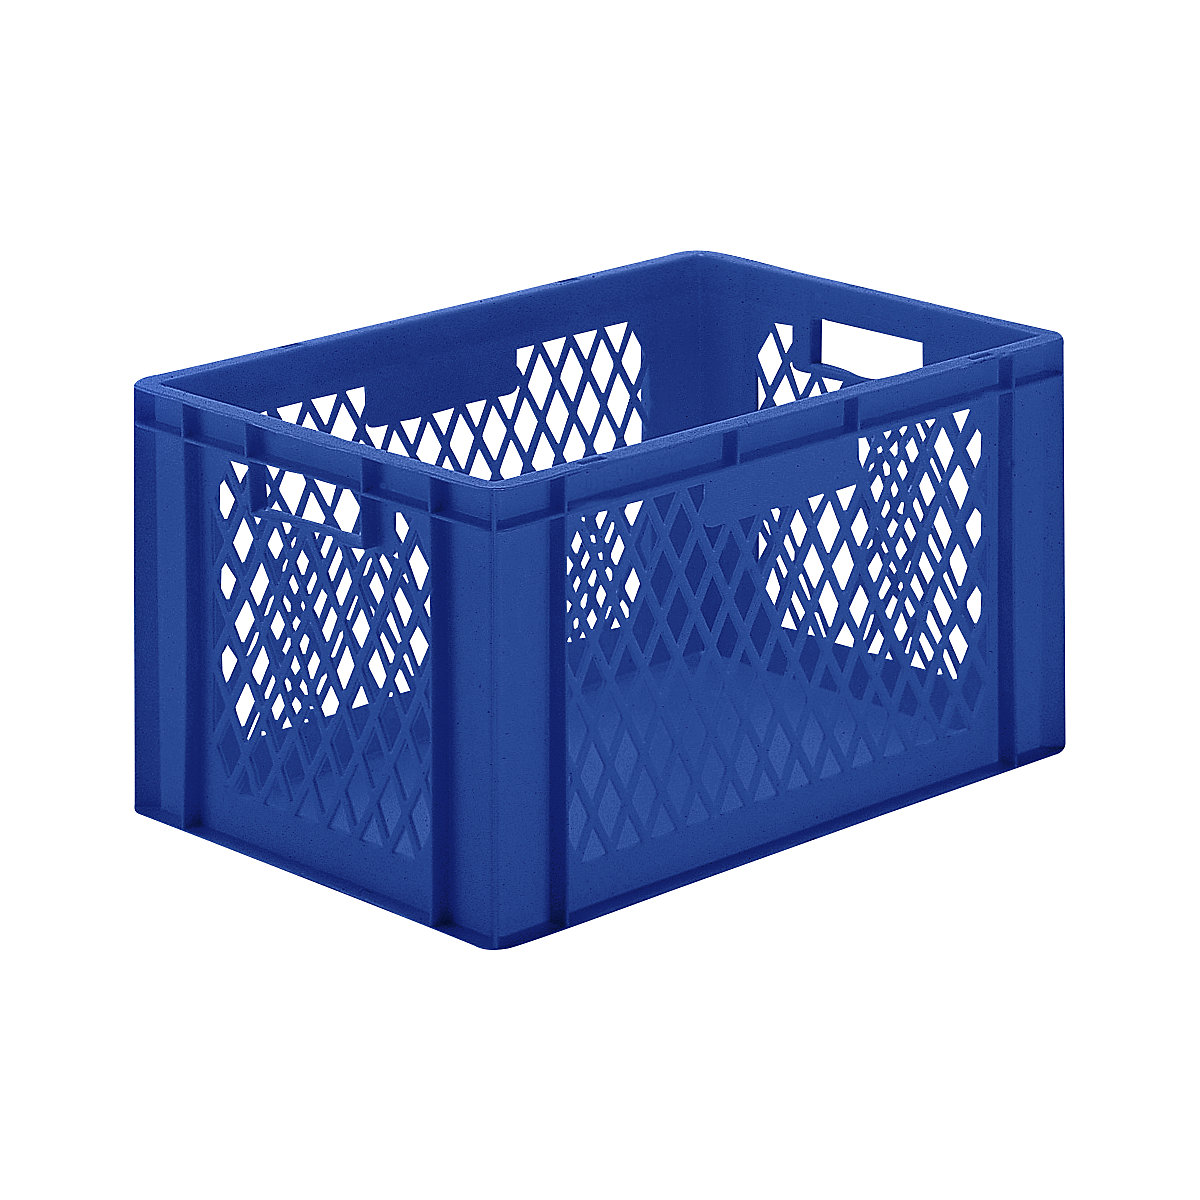 Euro stacking container, perforated walls, closed base, LxWxH 600 x 400 x 320 mm, blue, pack of 5-7